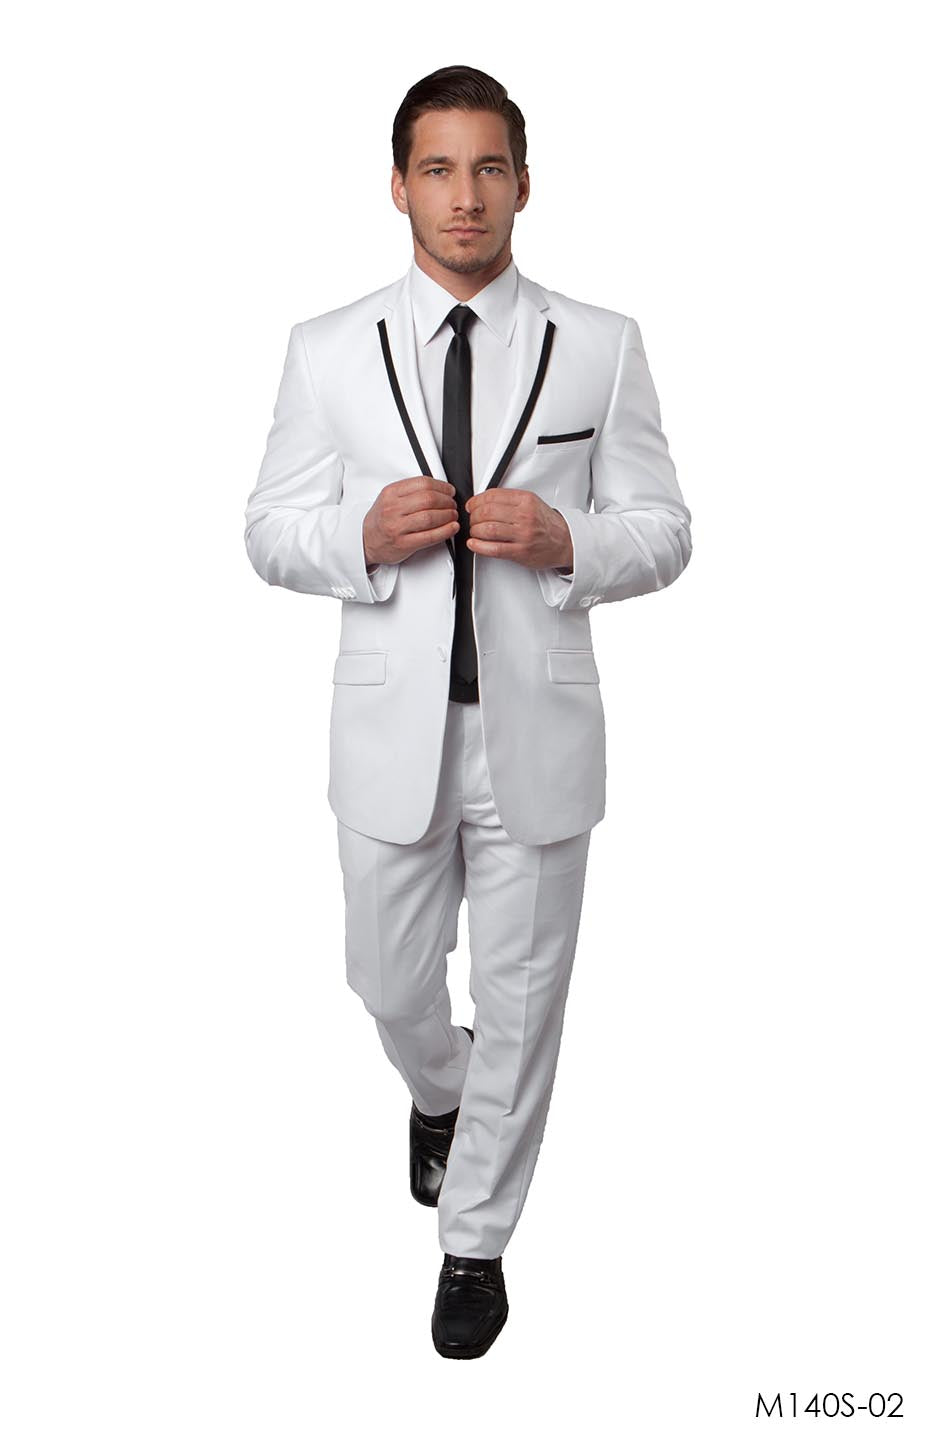 White / Black Suit For Men Formal Suits For All Ocassions M140S-02